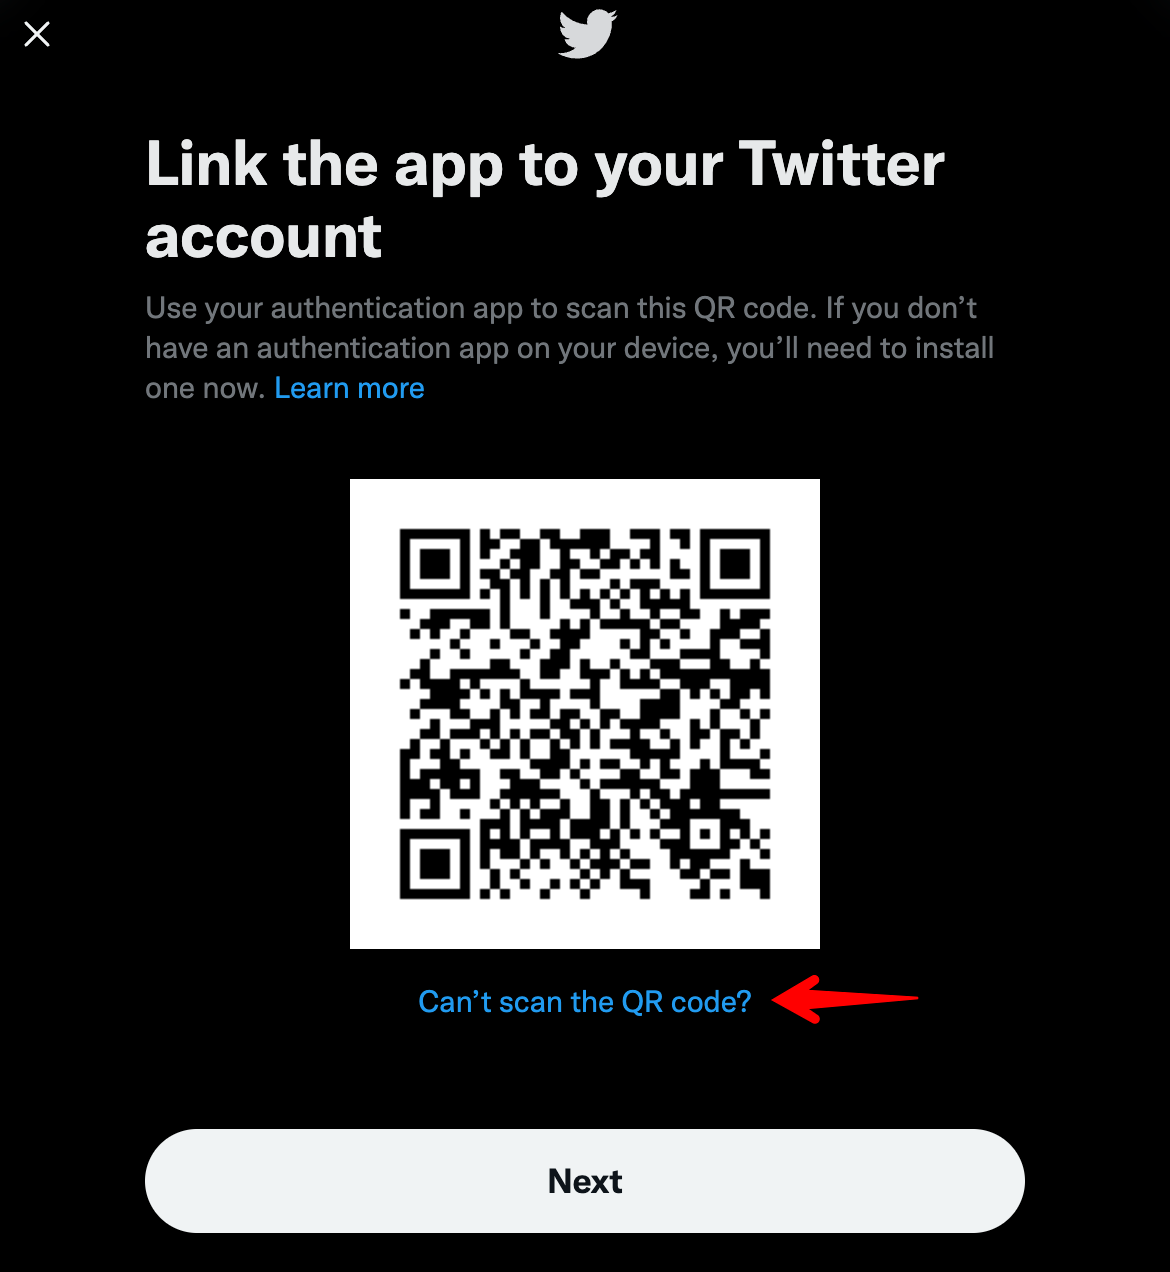 A modal titled “Link the app to your Twitter account” with an arrow pointing to a “Can’t scan the QR code?” link